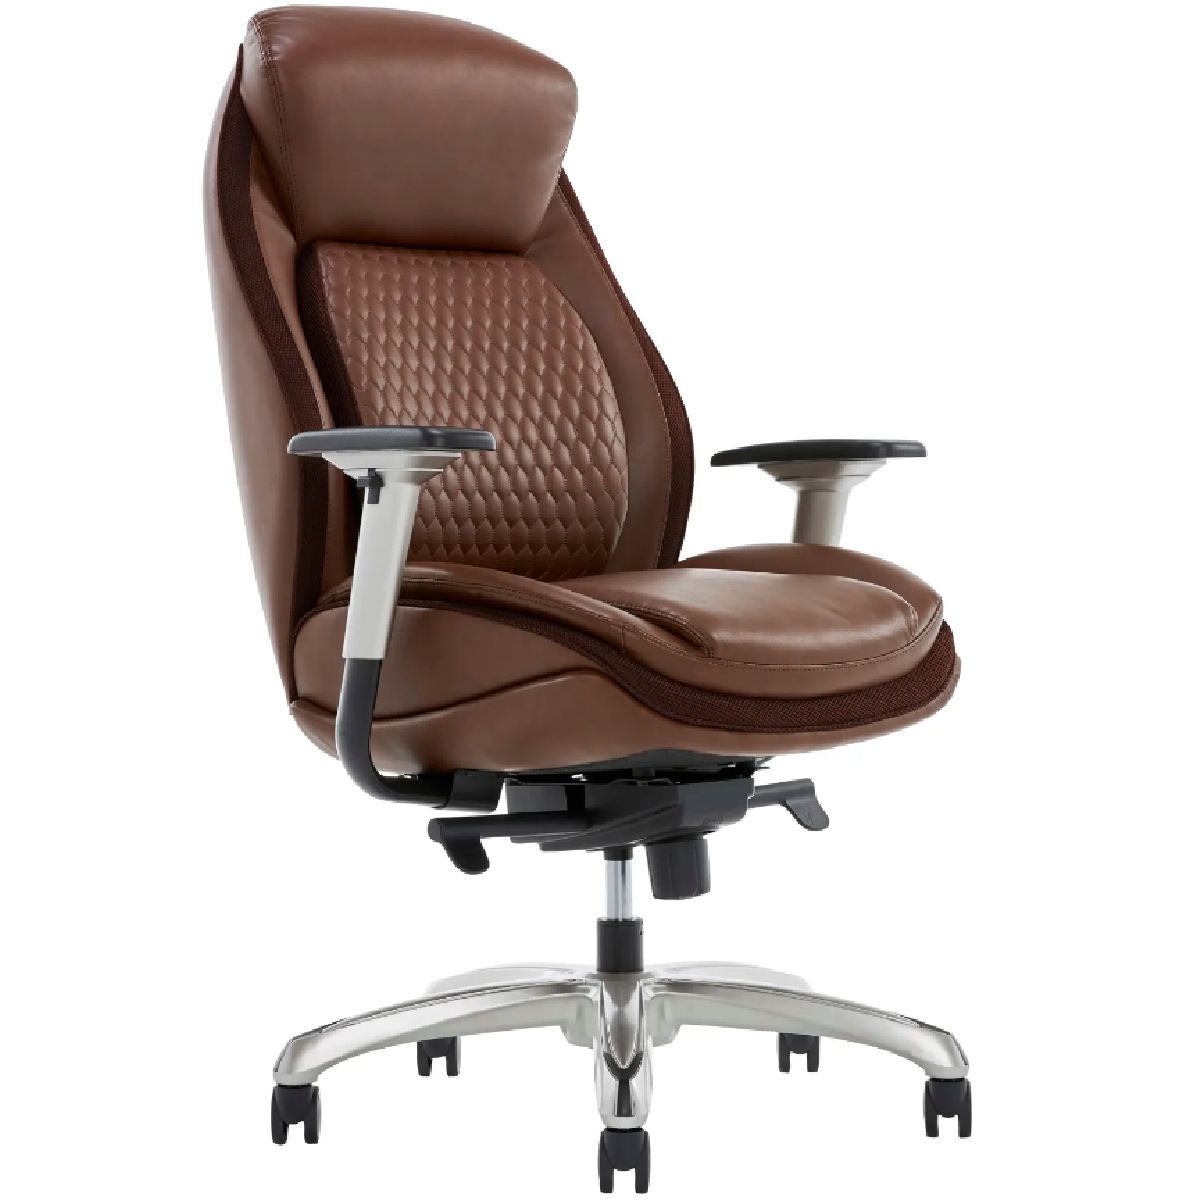  Leather Chair Office Depot with Simple Decor